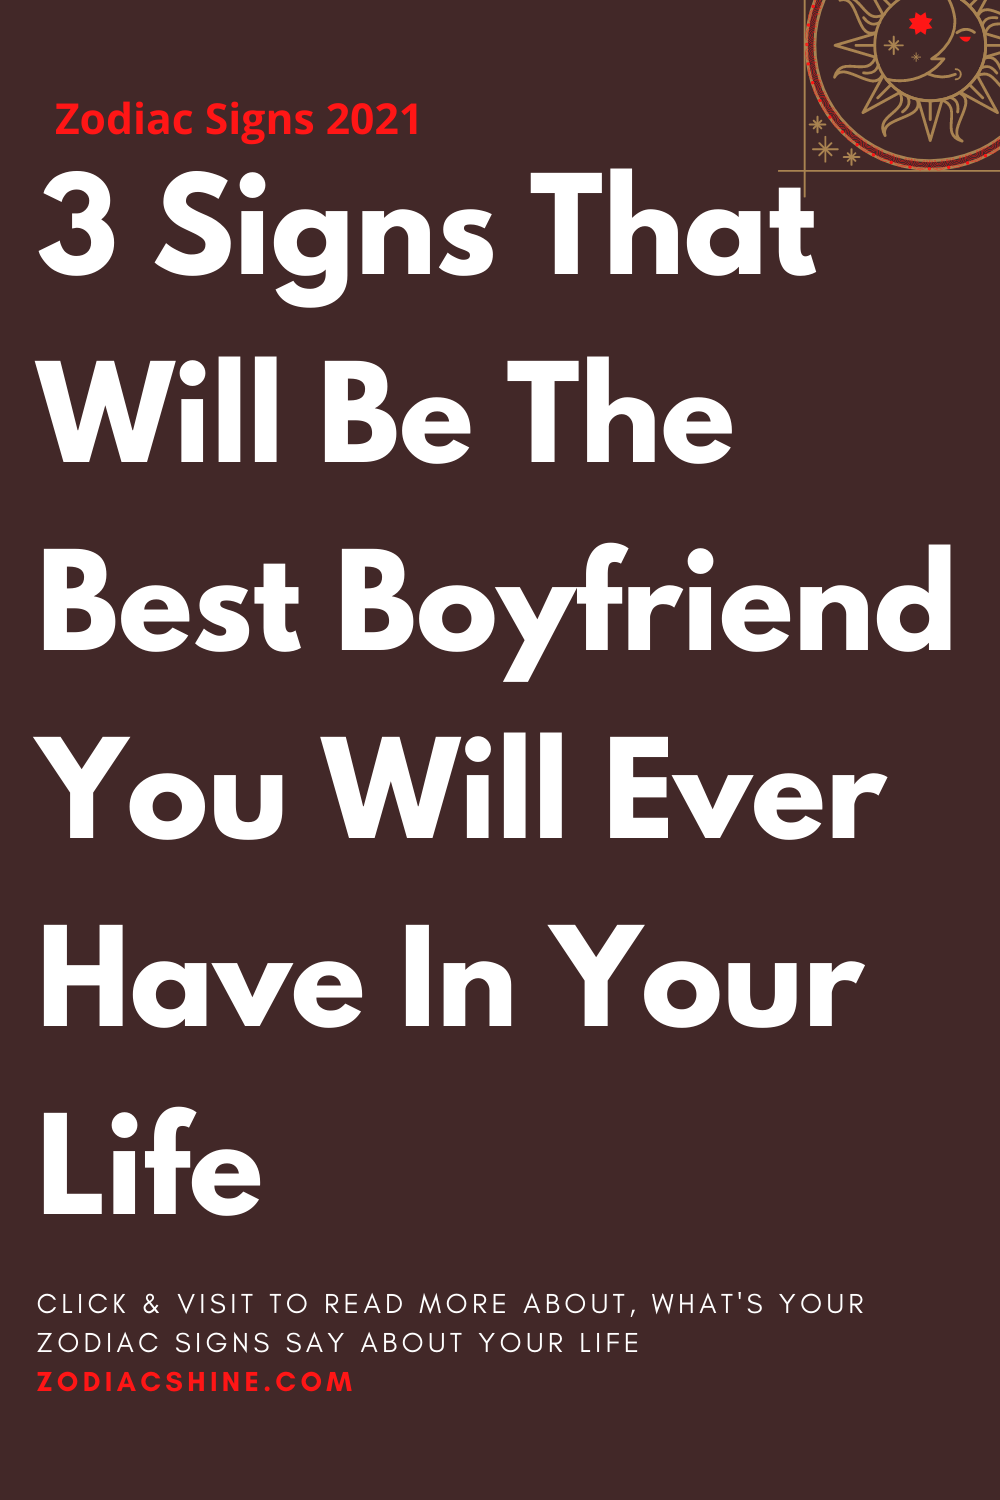 3 Signs That Will Be The Best Boyfriend You Will Ever Have In Your Life